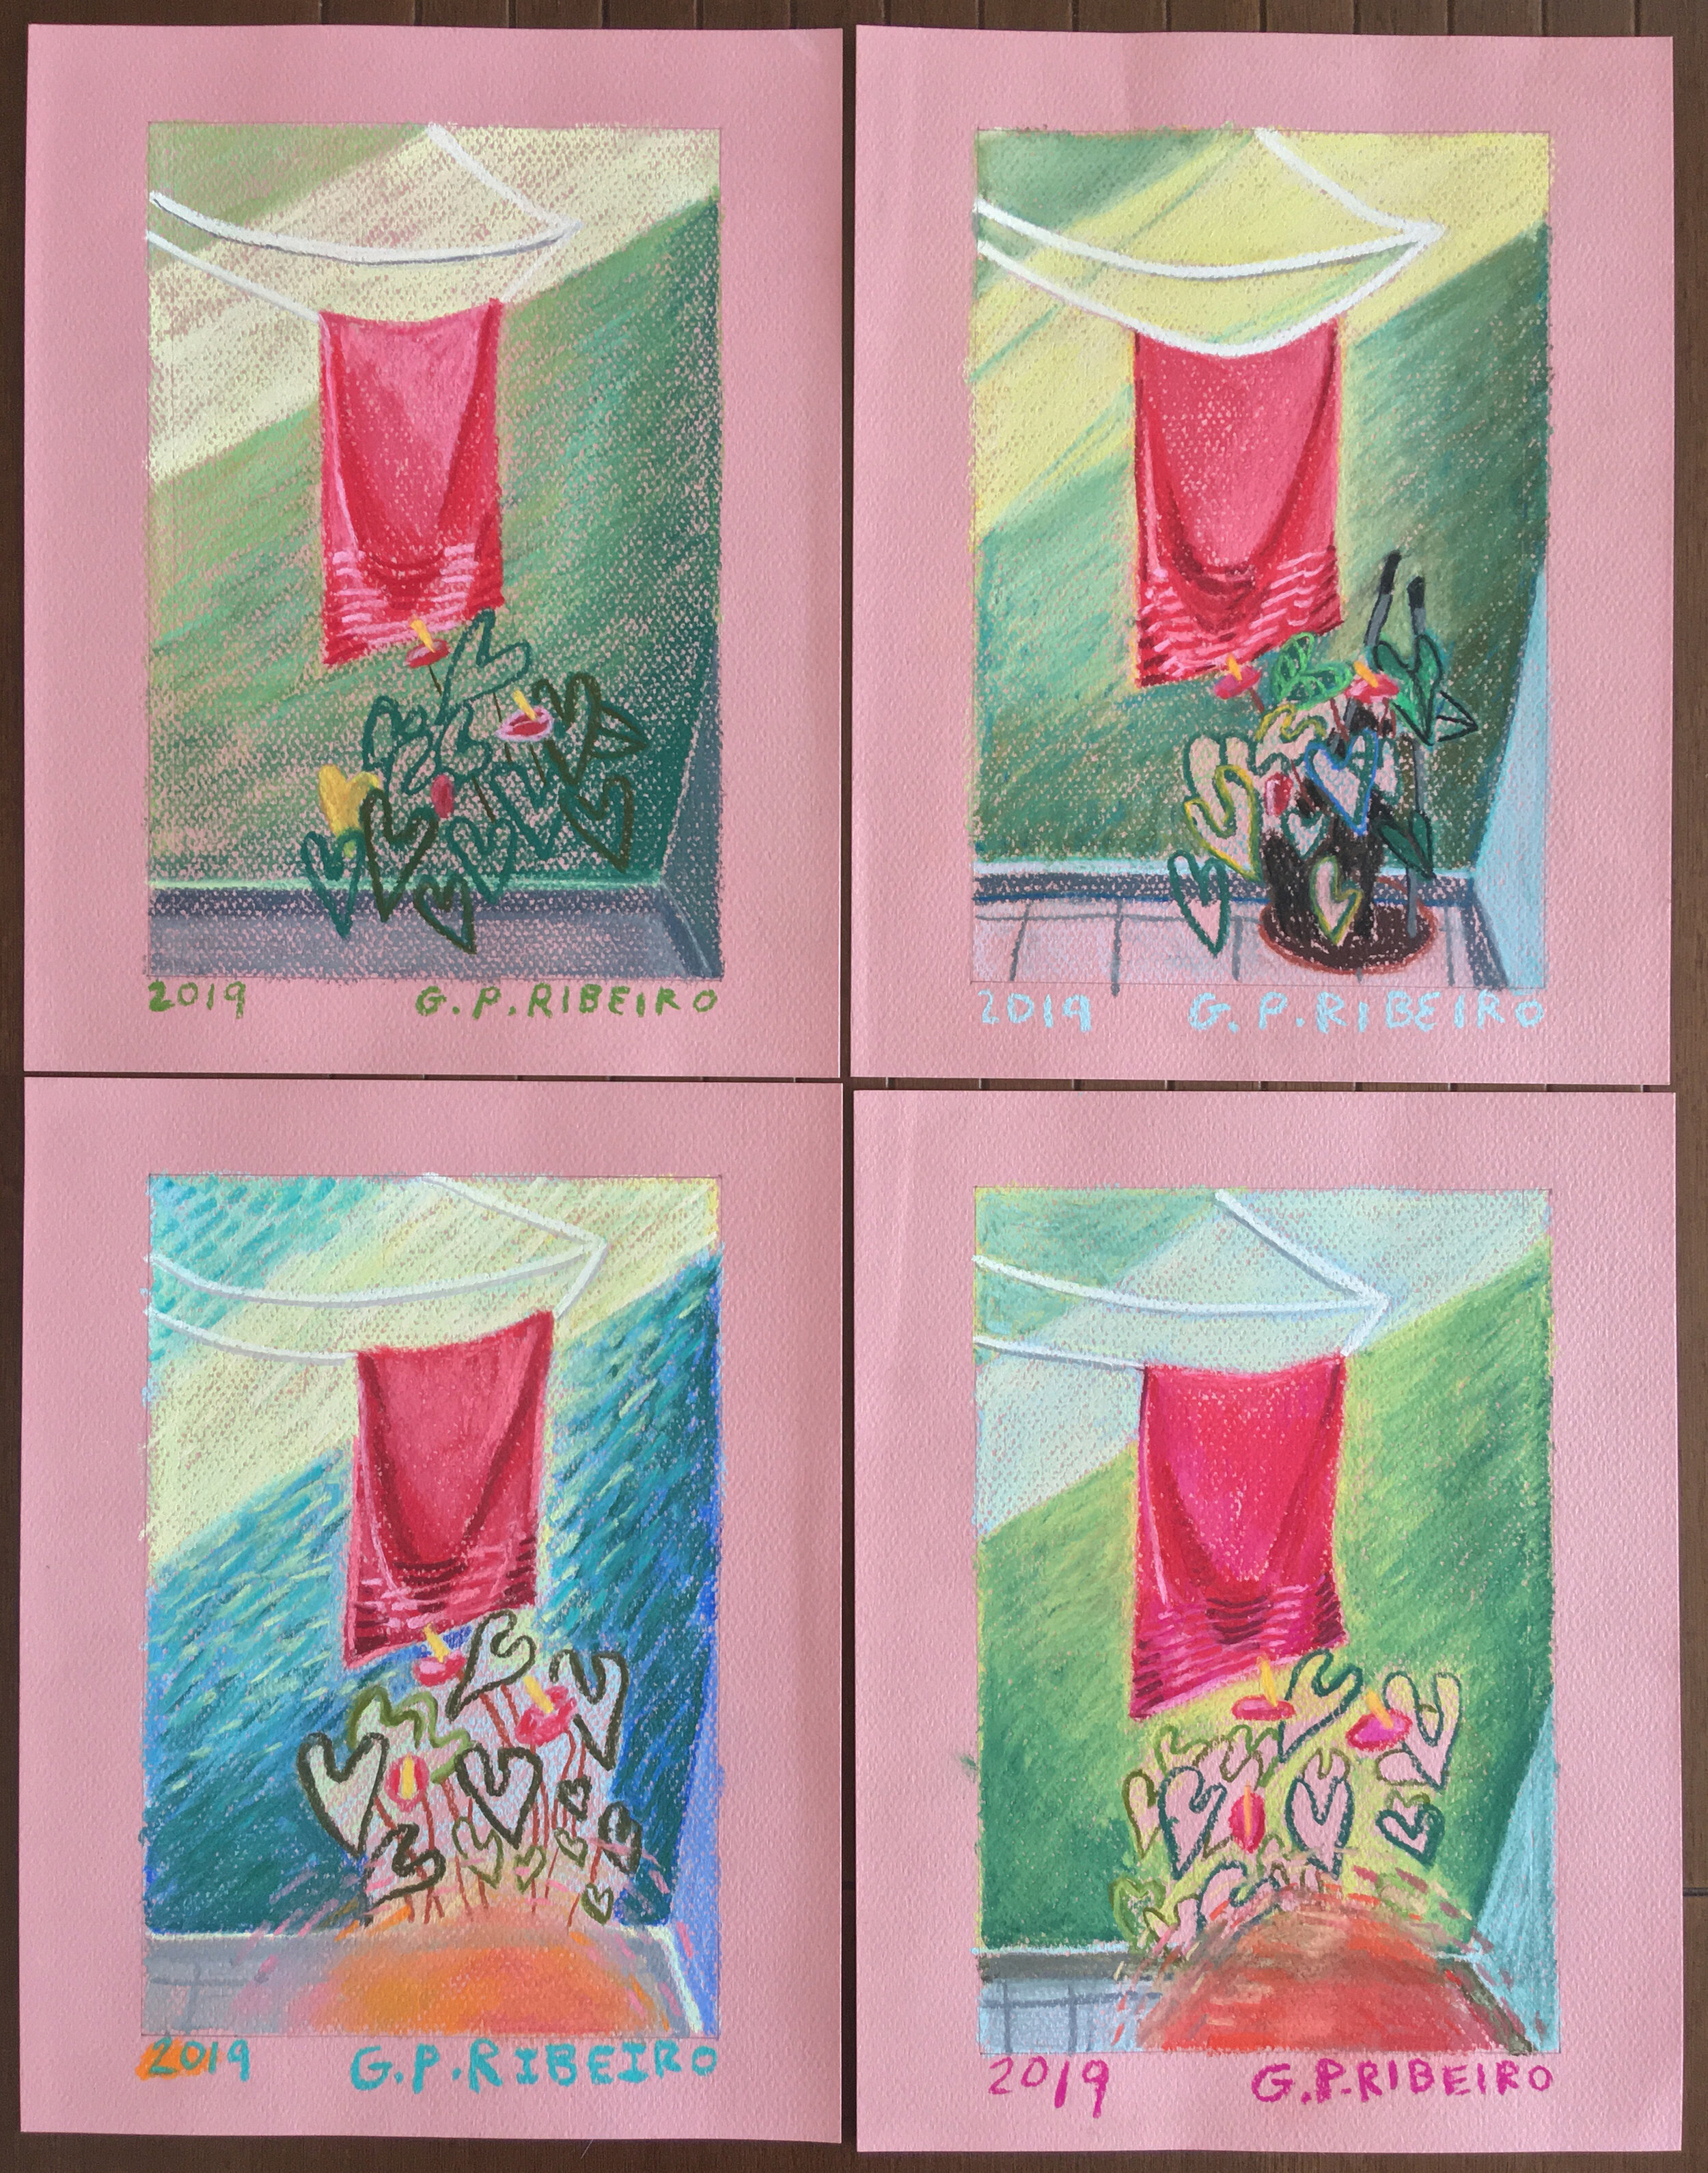  Set #5 or #6  image area 6” x 9” each  chalk pastel on colored paper  2019 